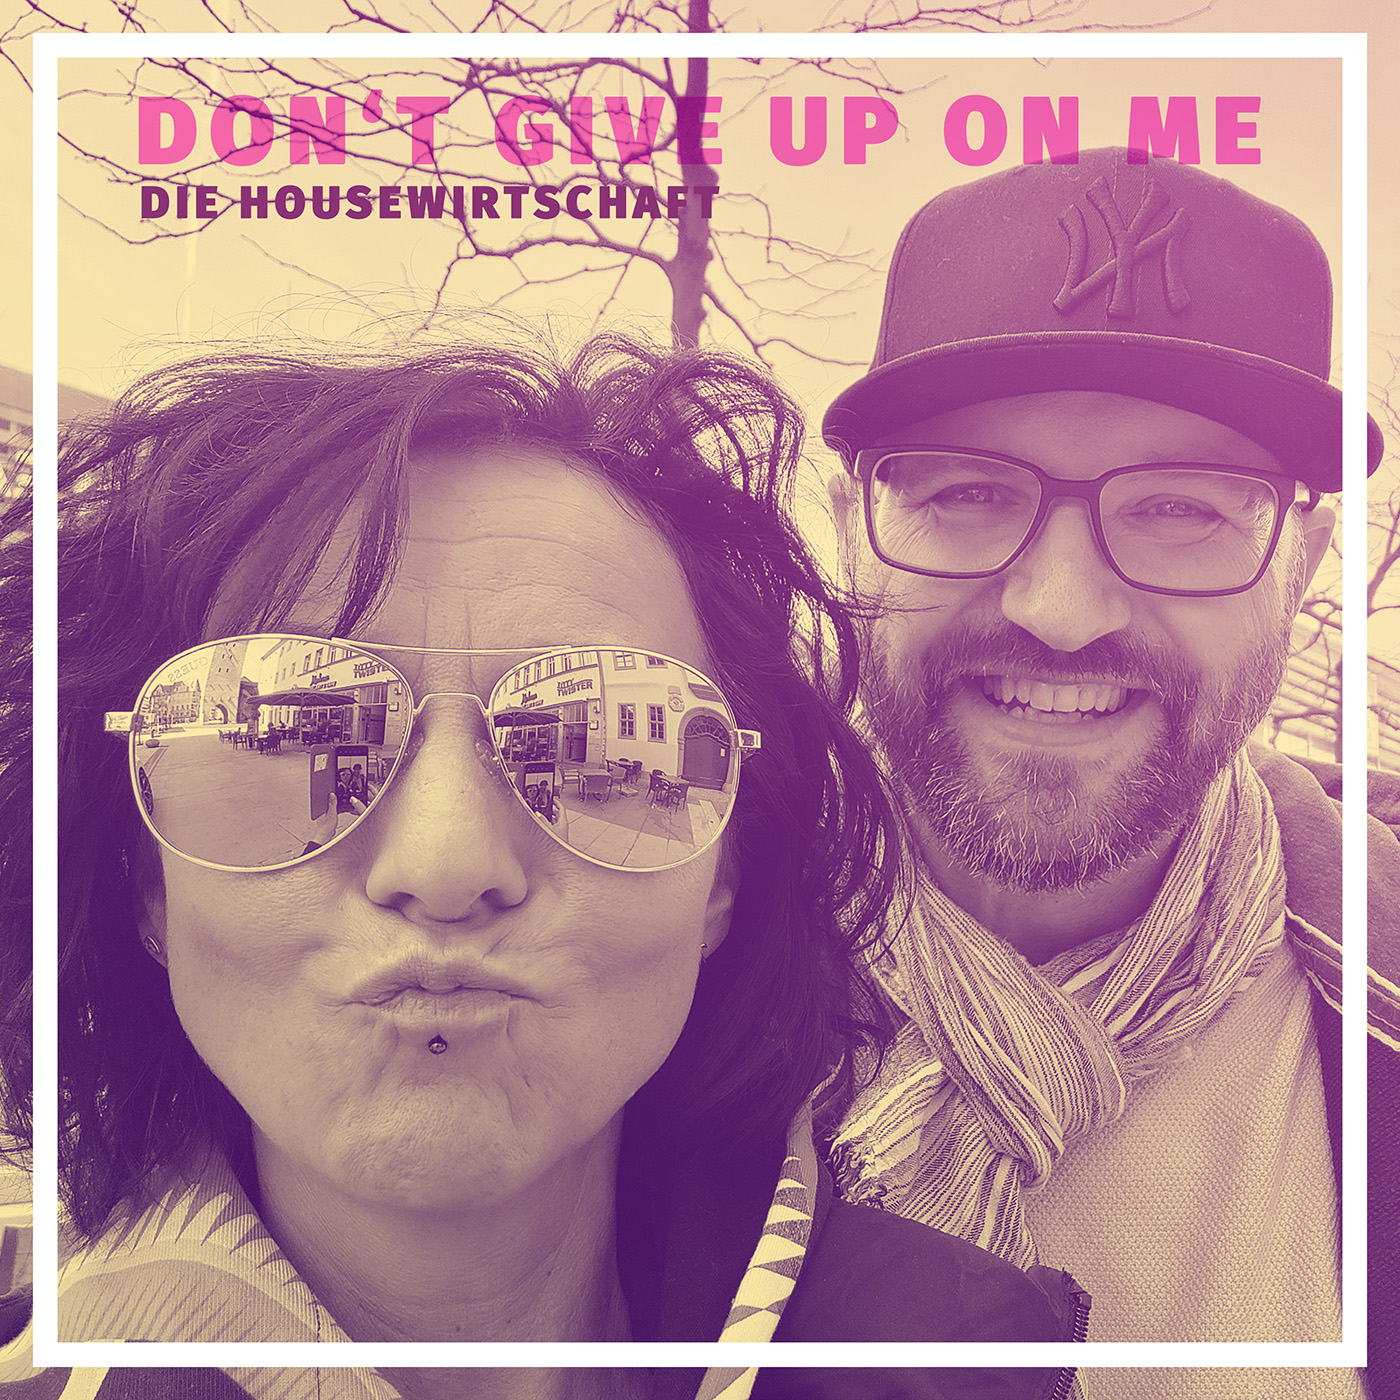 HouseWirtschaft  – Don’t give up on me Cover_1400